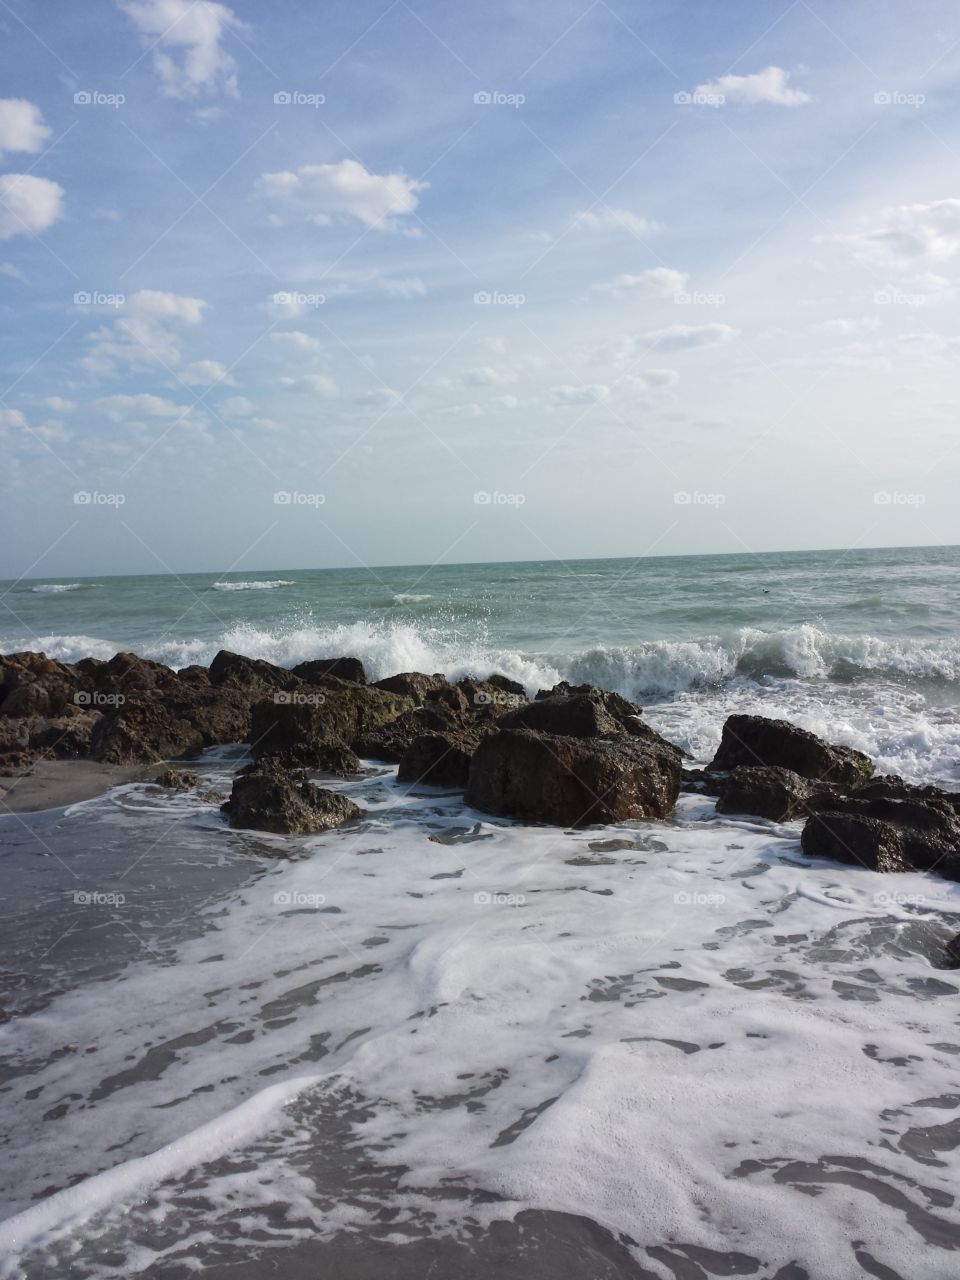 Caspersen Beach. The tide came in to crash on the rocks as we searched for shark teeth at this beach in Sarasota.